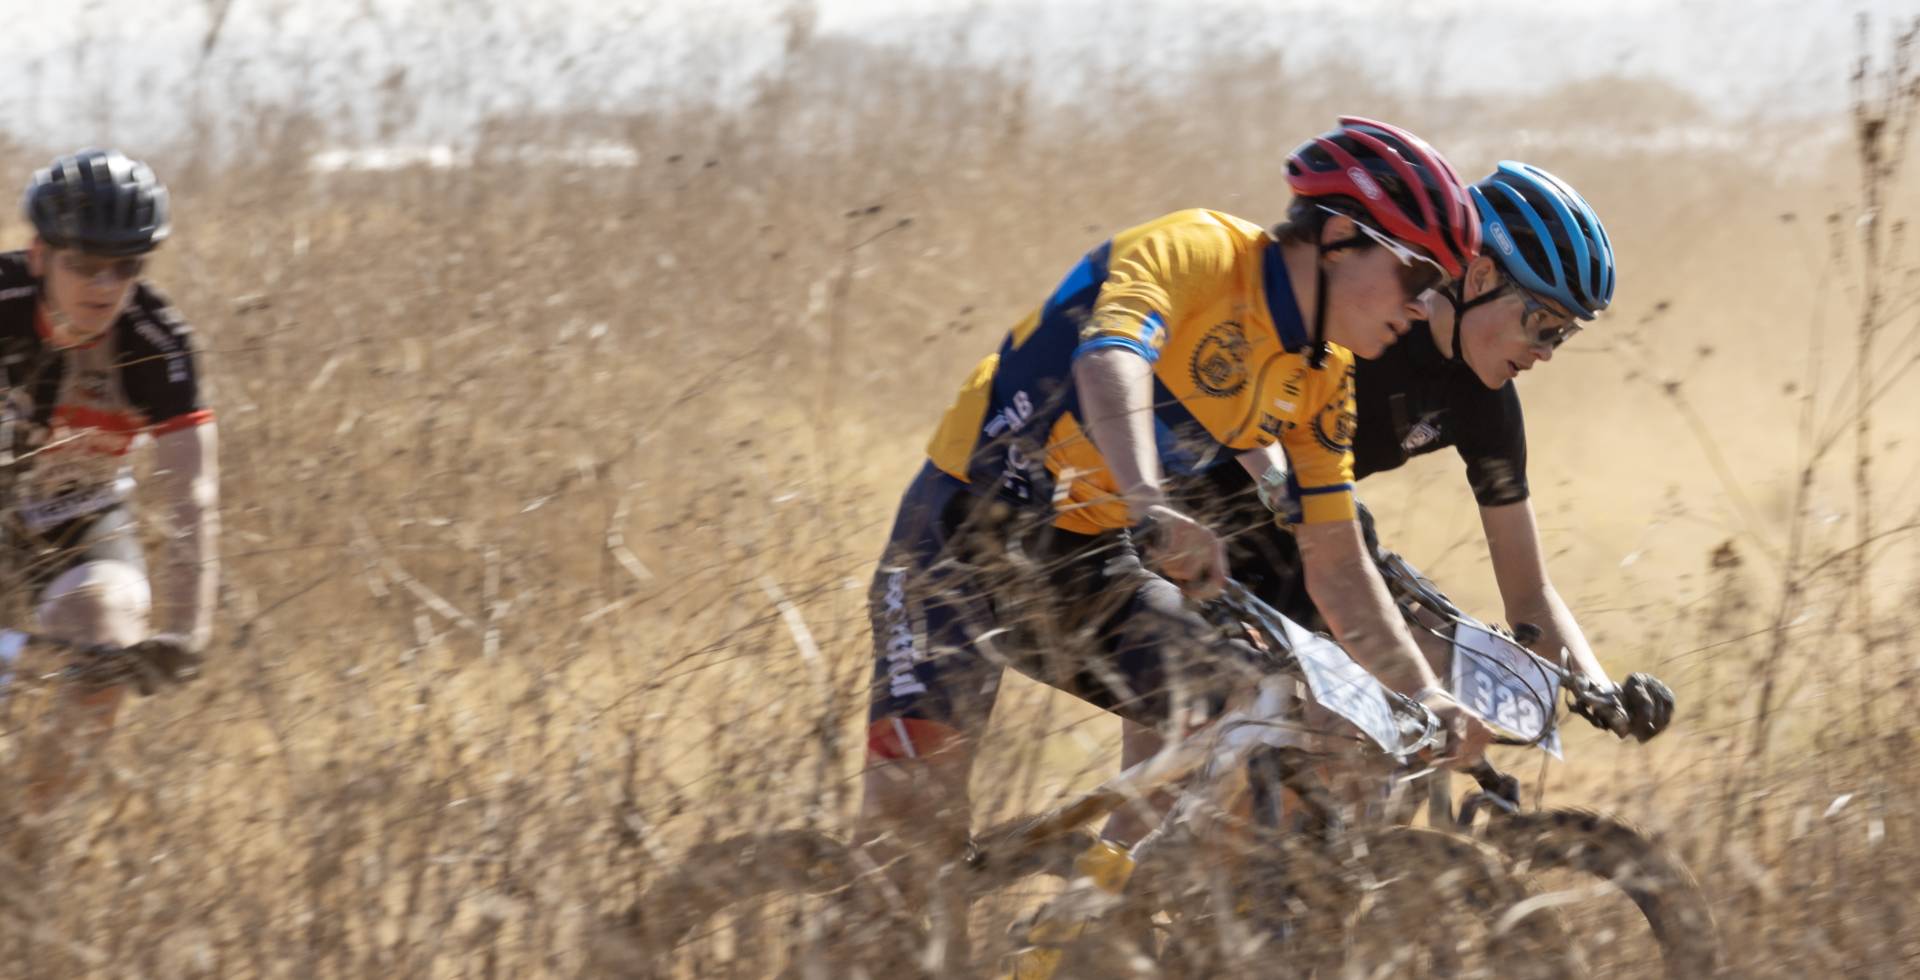 mtb riders dualling on course